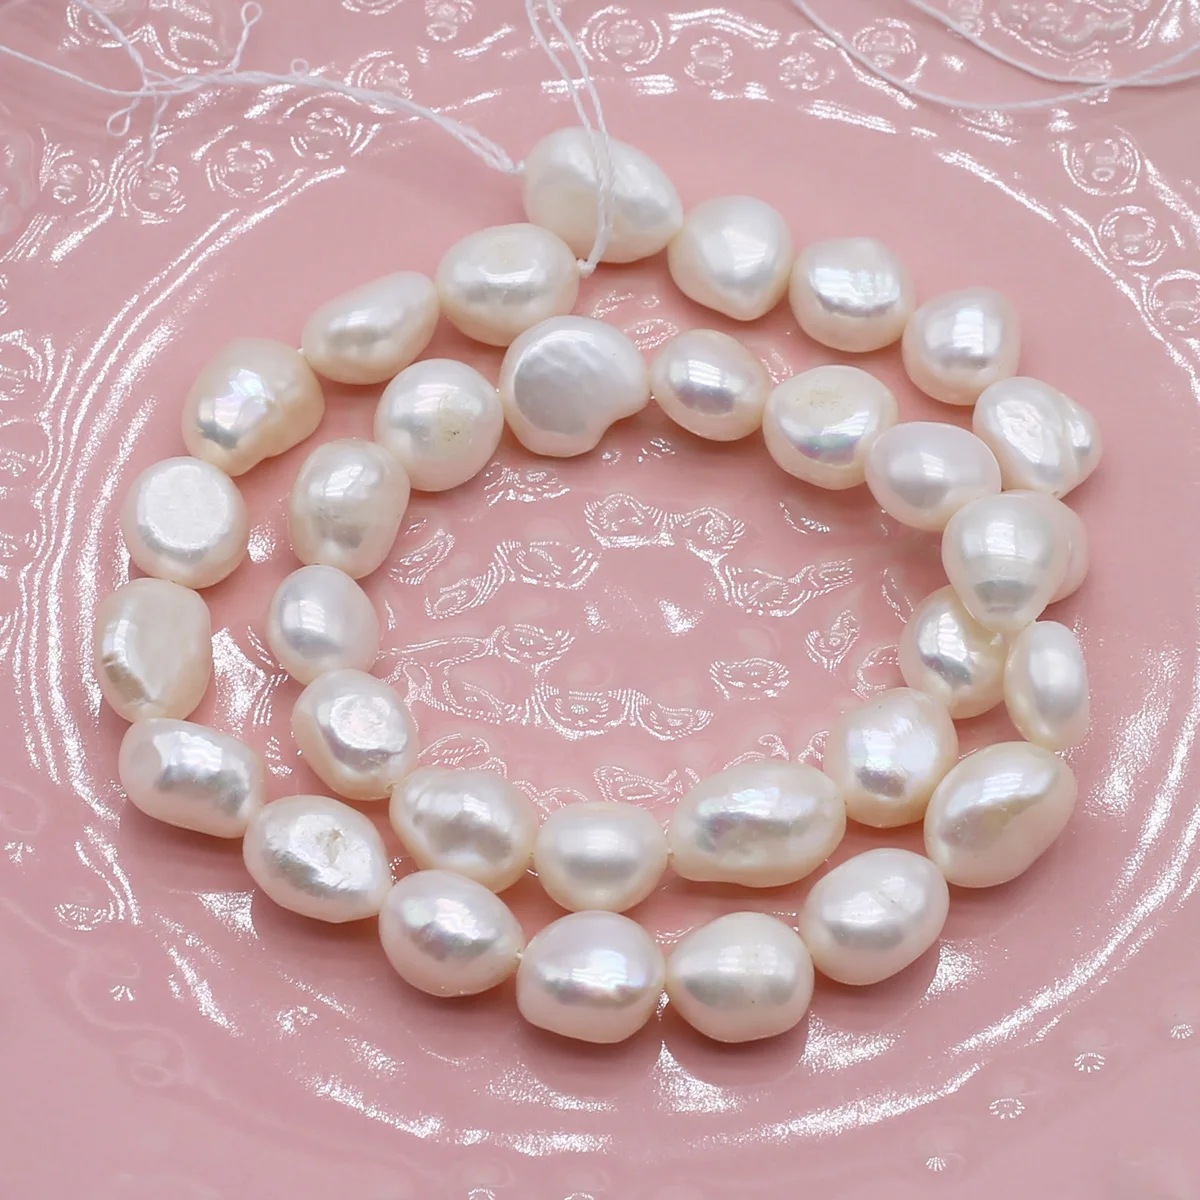 Zhe Ying Genuine Freshwater Pearl Beads for Jewelry Making, 0.8mm Hole  Cultured Rice Shape White Pearls for Bracelet Making Loose Beads (7-8mm  Rice